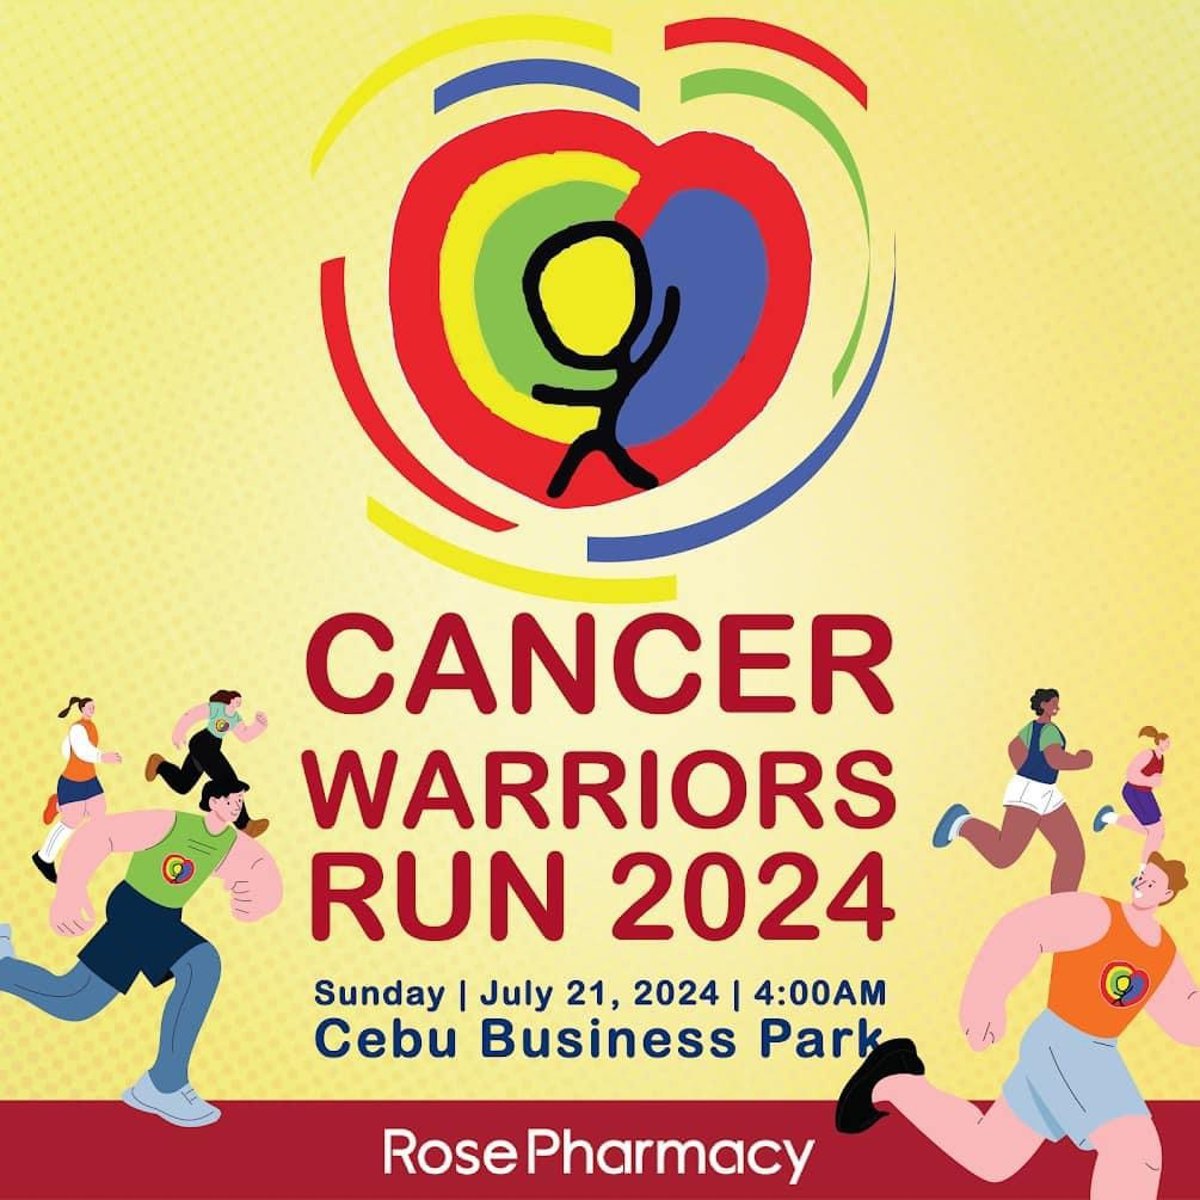 Rose Pharmacy is set to hold Cancer Warriors Run 2024